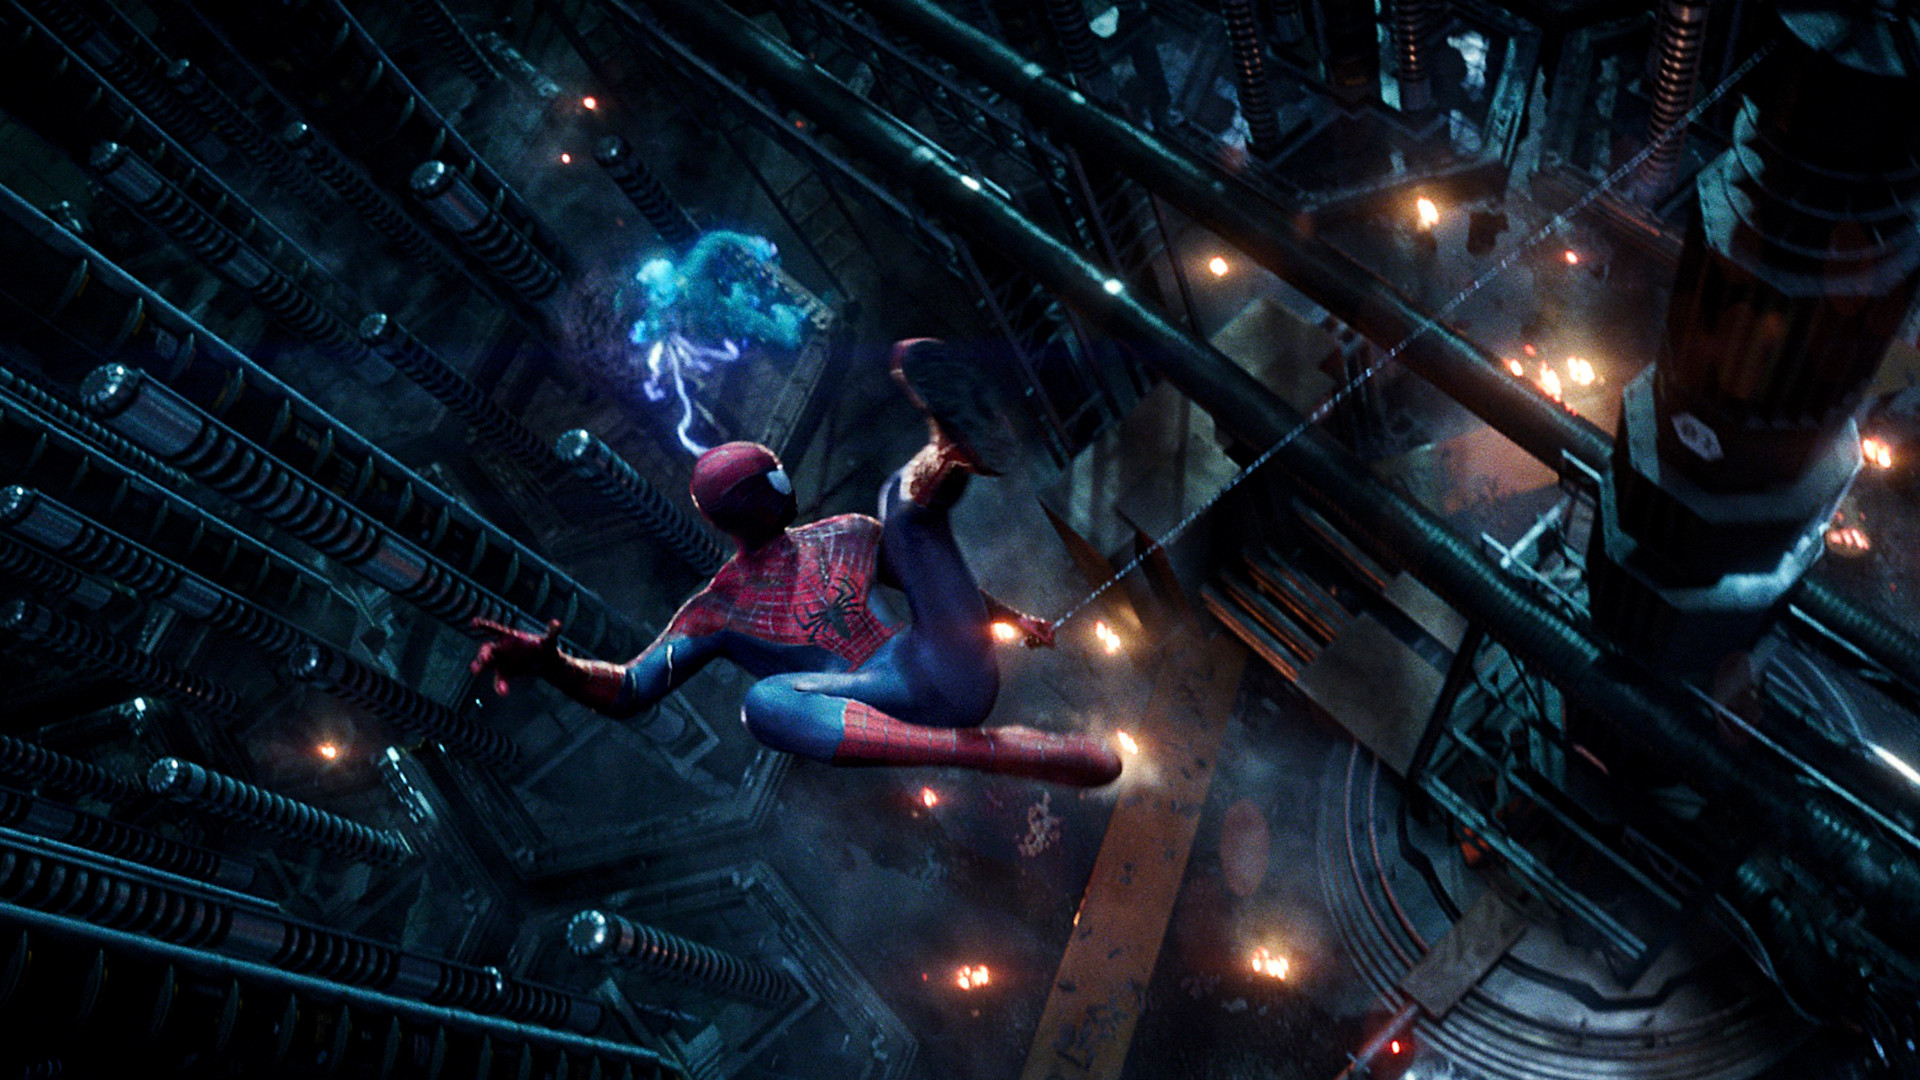 1920x1080 Go Back > Images For > Spiderman 4 Wallpaper Hd 1080p